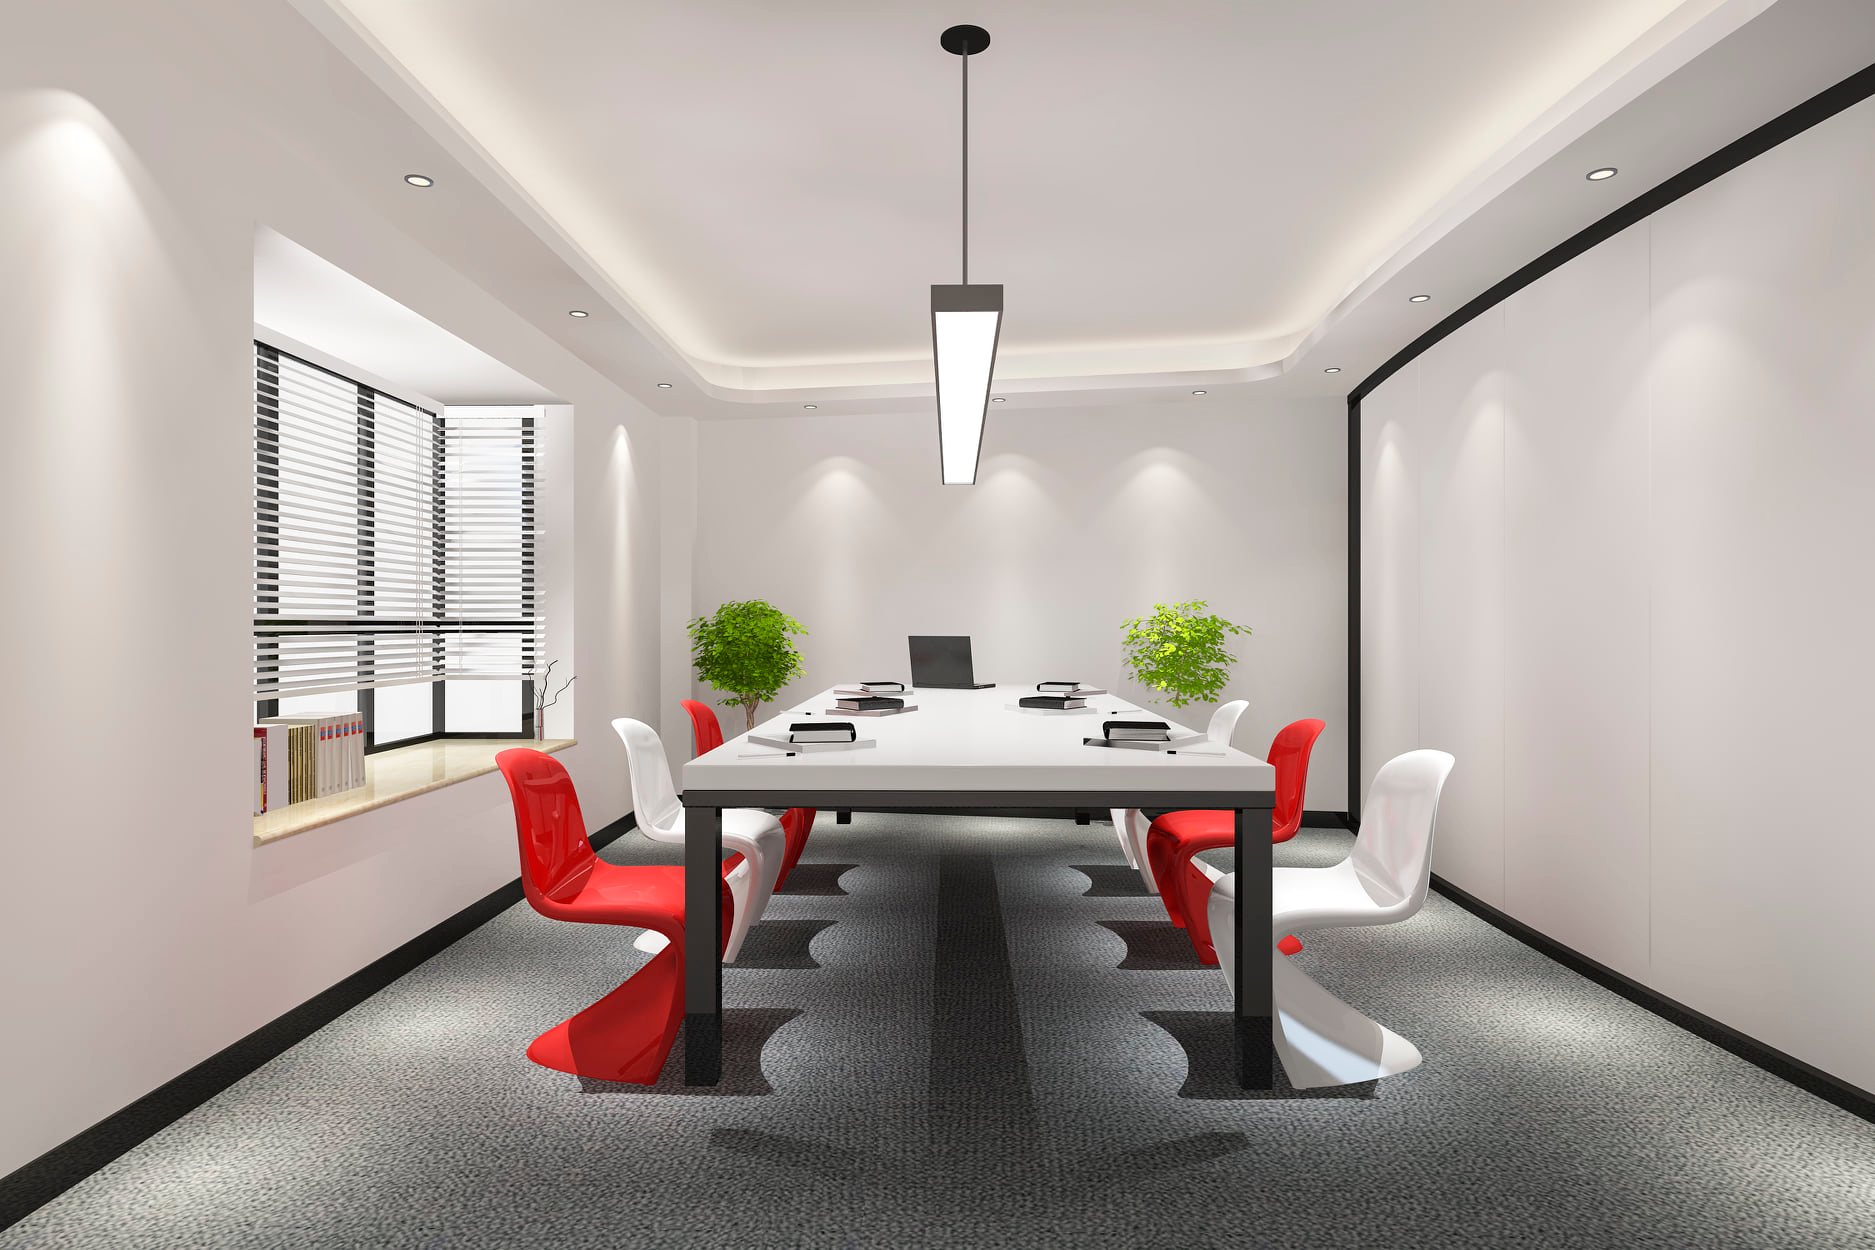 Commercial Interior Design Guide by Expert Interior Designers | Keystone Interior Design | Office Interior Designers in Mohali - GL104009